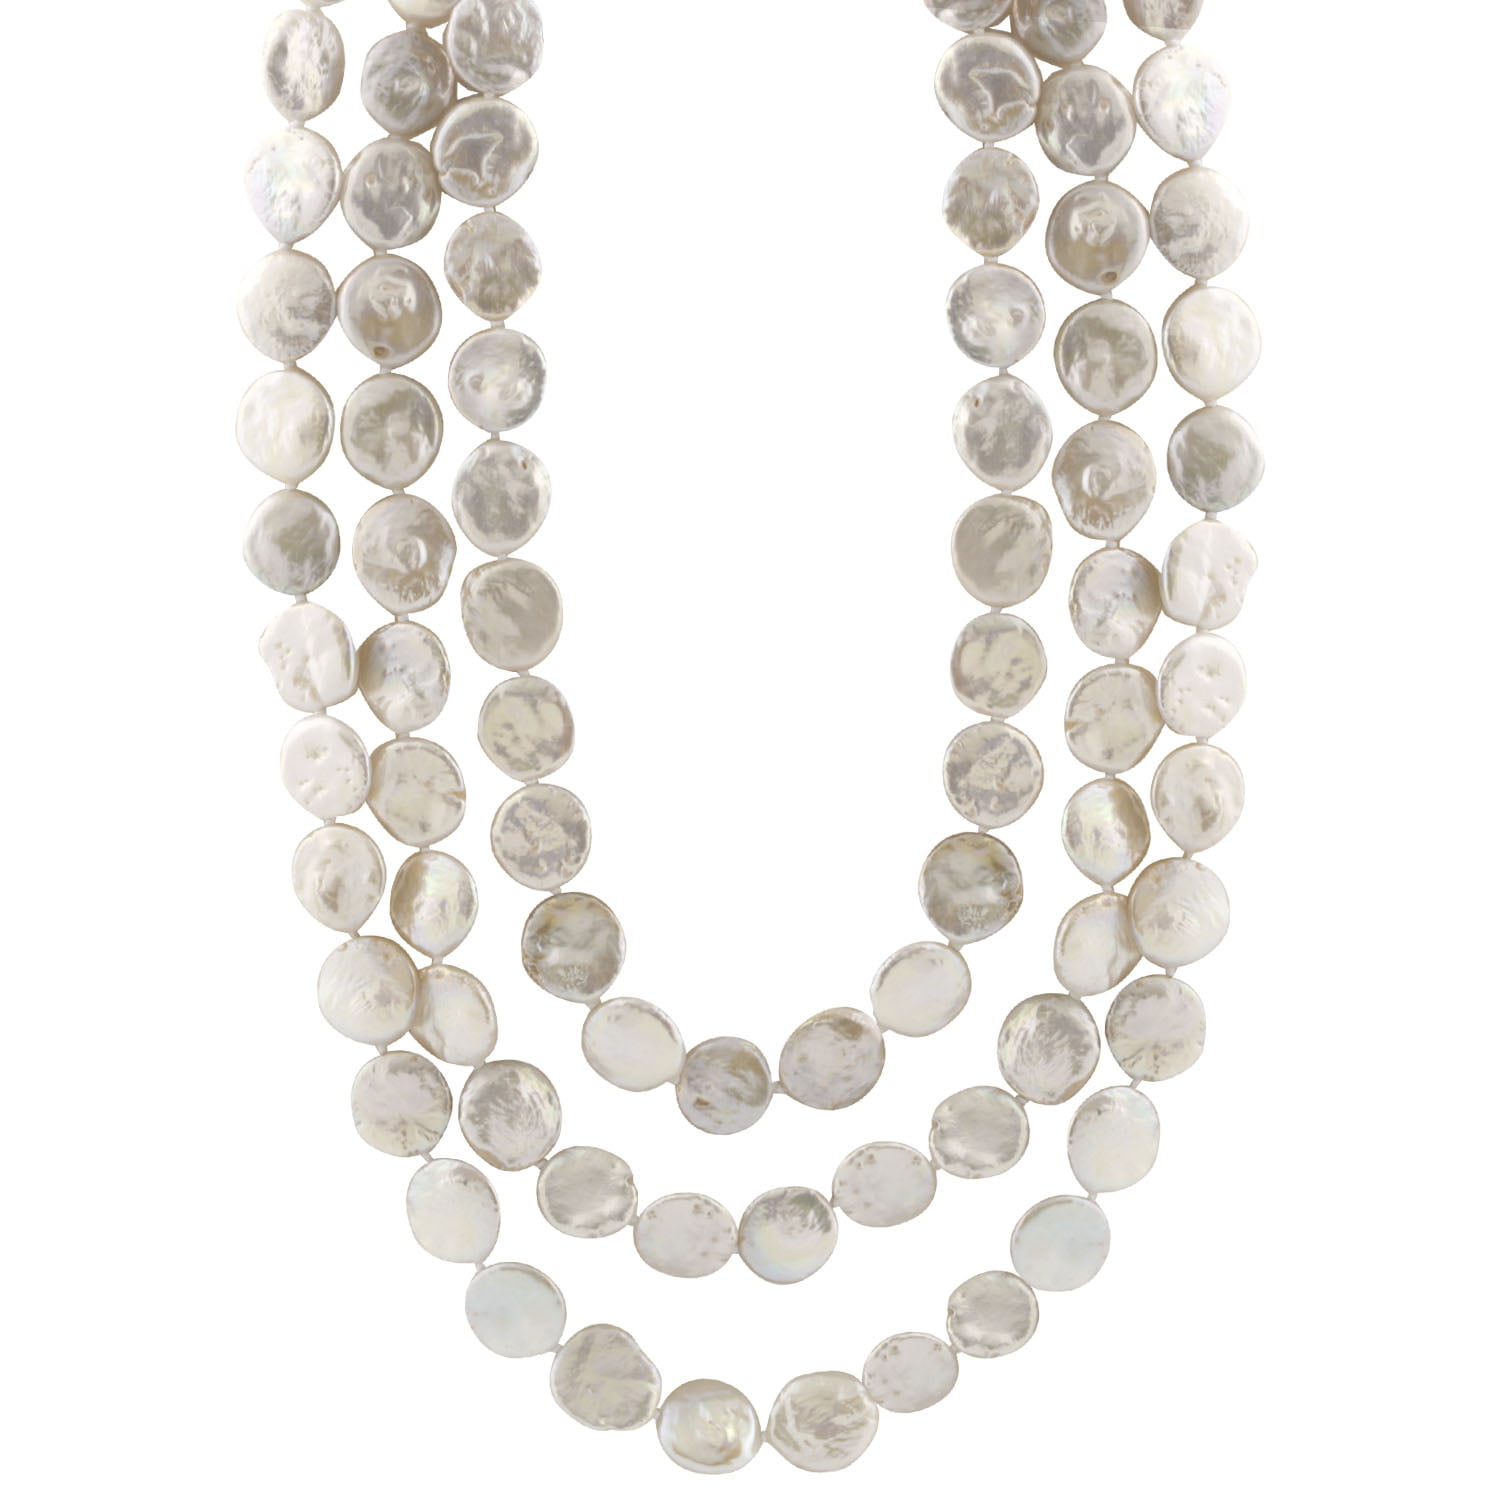 Single Strand White Freshwater Coin Pearl Necklace 14-15mm